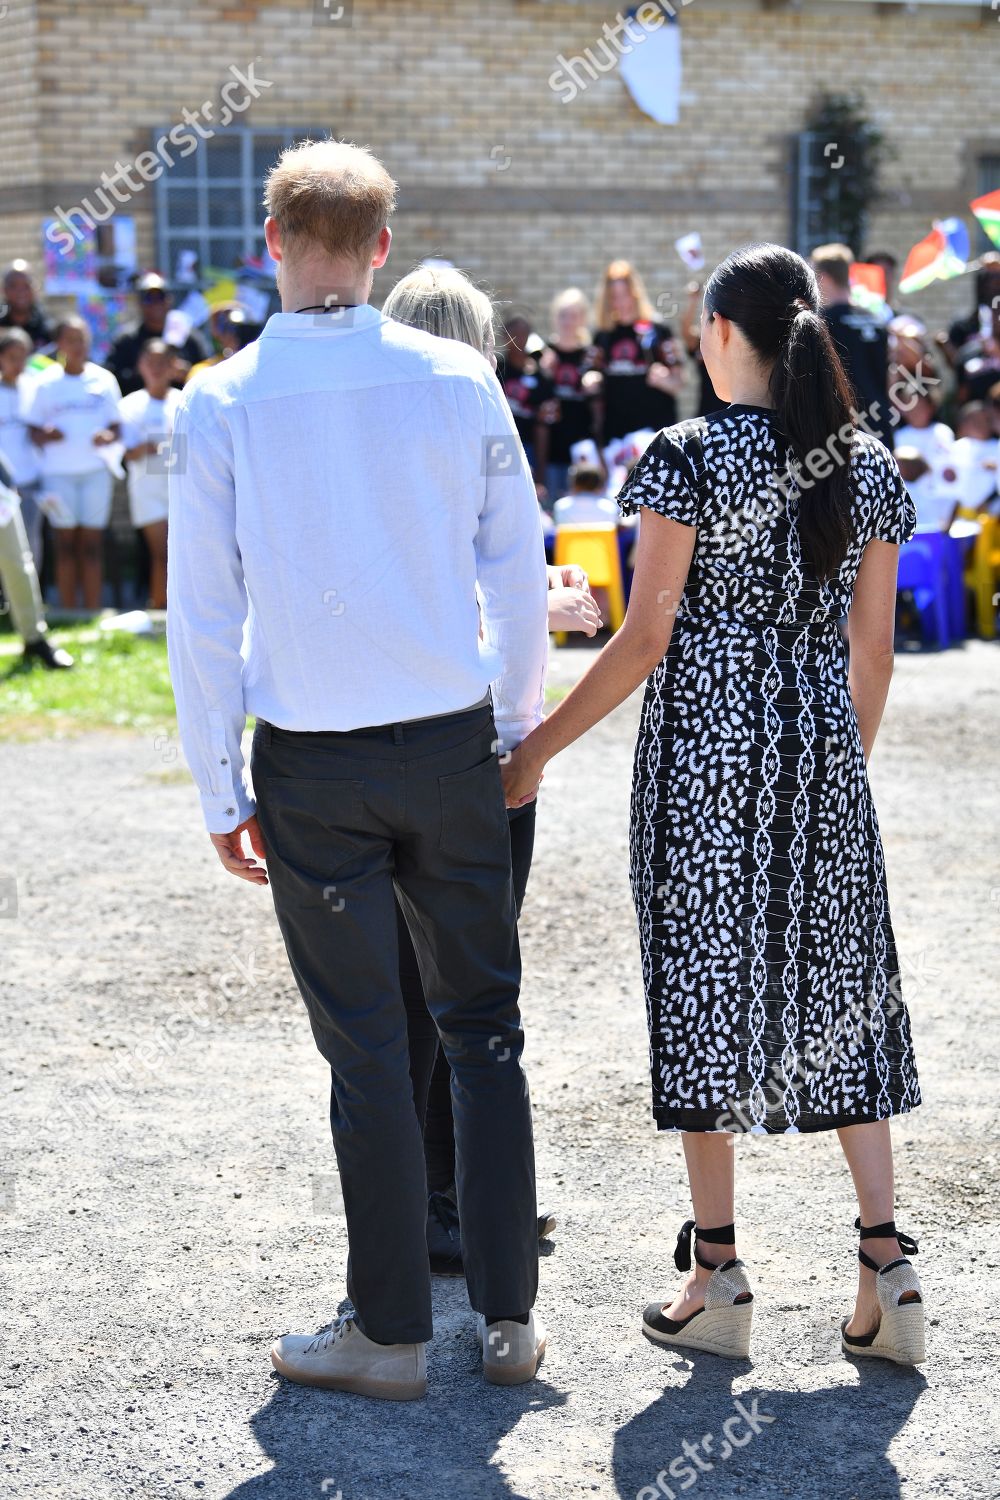 prince-harry-and-meghan-duchess-of-sussex-visit-to-africa-shutterstock-editorial-10421470p.jpg